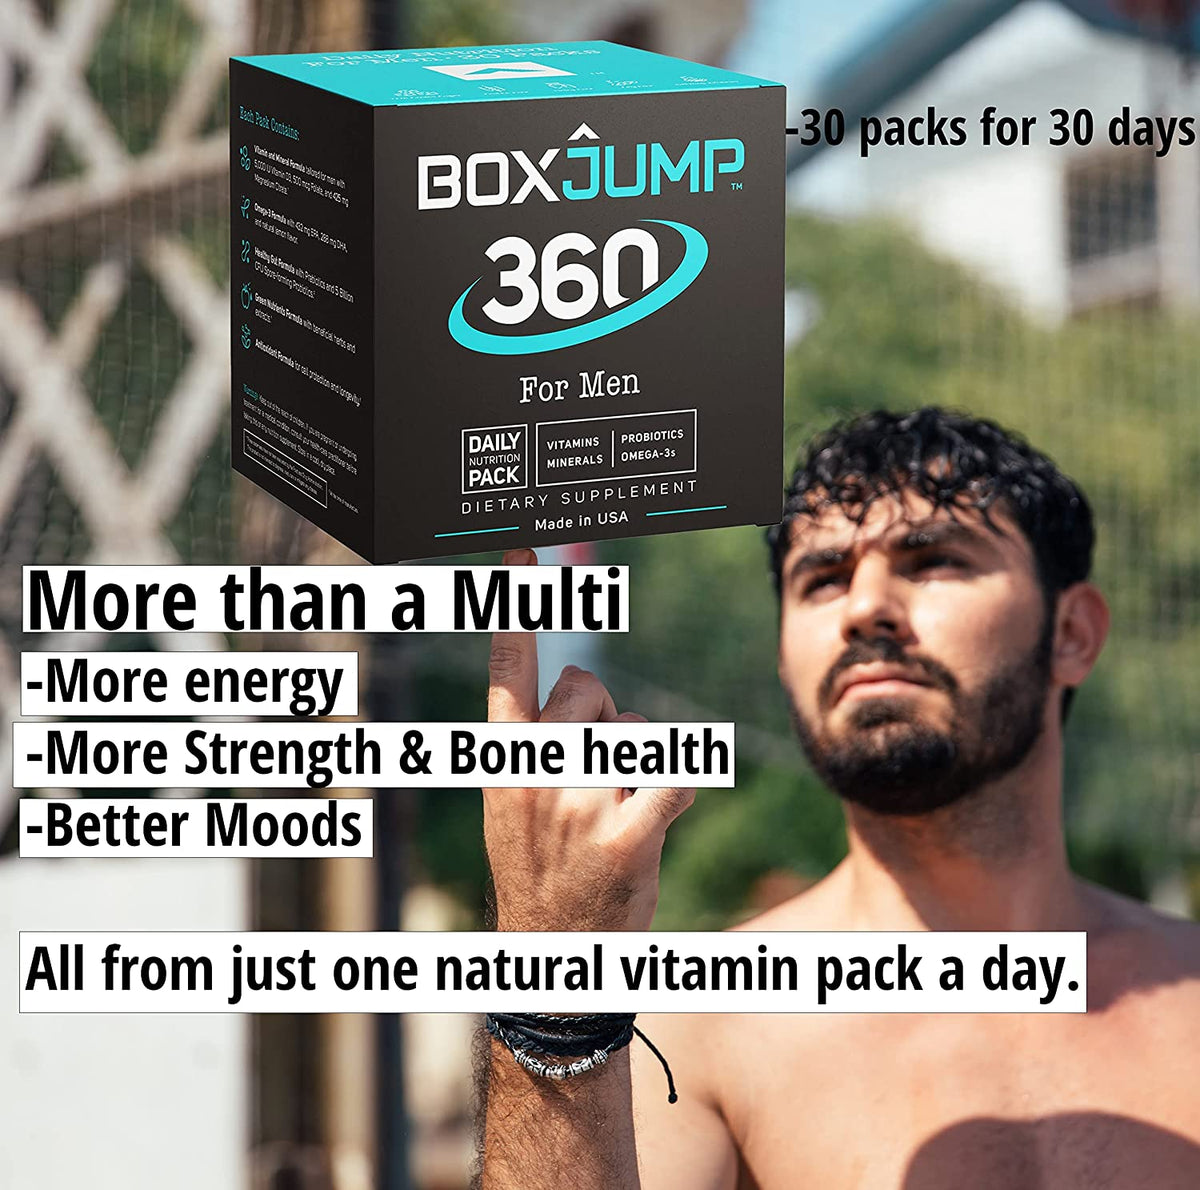 BoxJump 360 for Men, Daily vitamins with 30 packs for 30 days